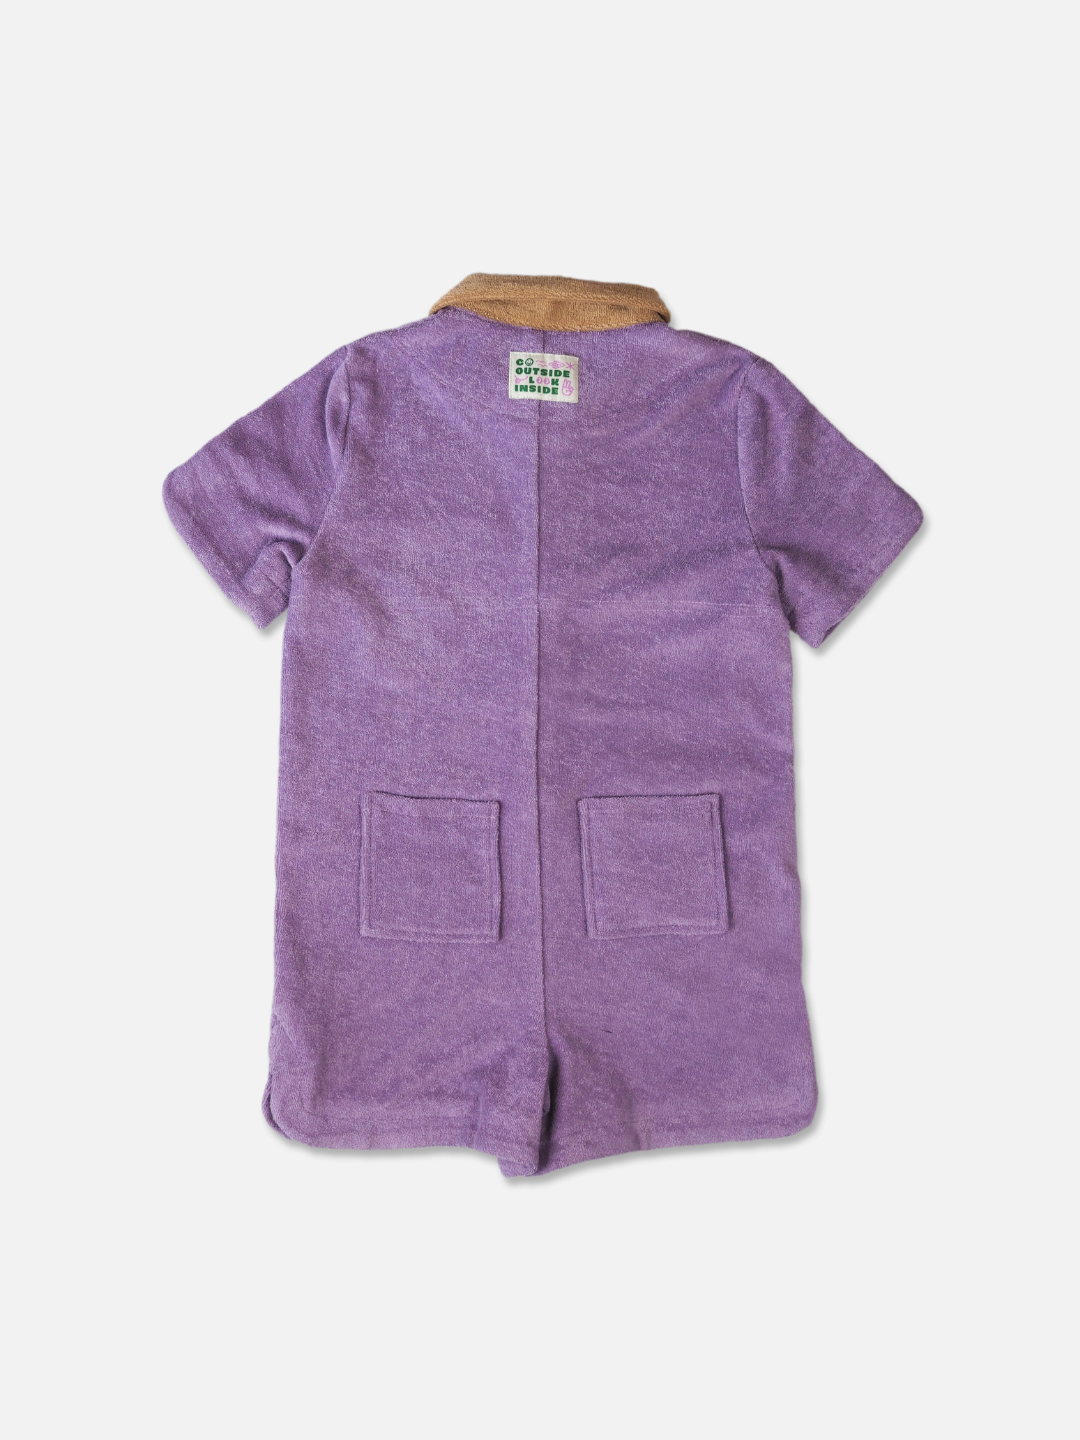 Plum | Rear view of a kids' jumpsuit in pale plum with sand collar, and two back pockets